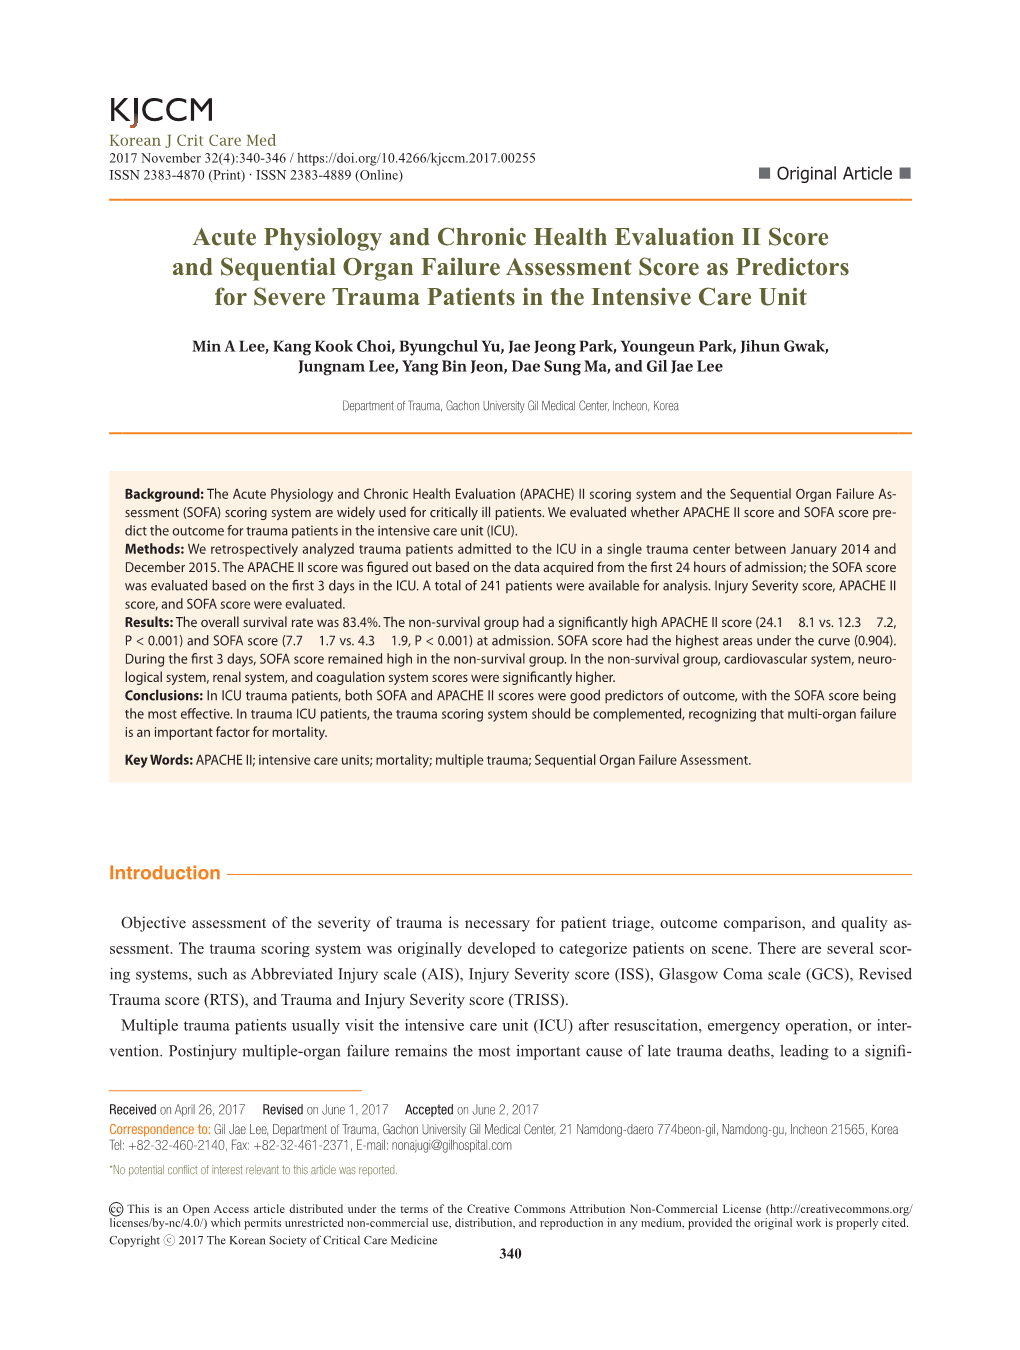 Acute Physiology and Chronic Health Evaluation II Score and Sequential